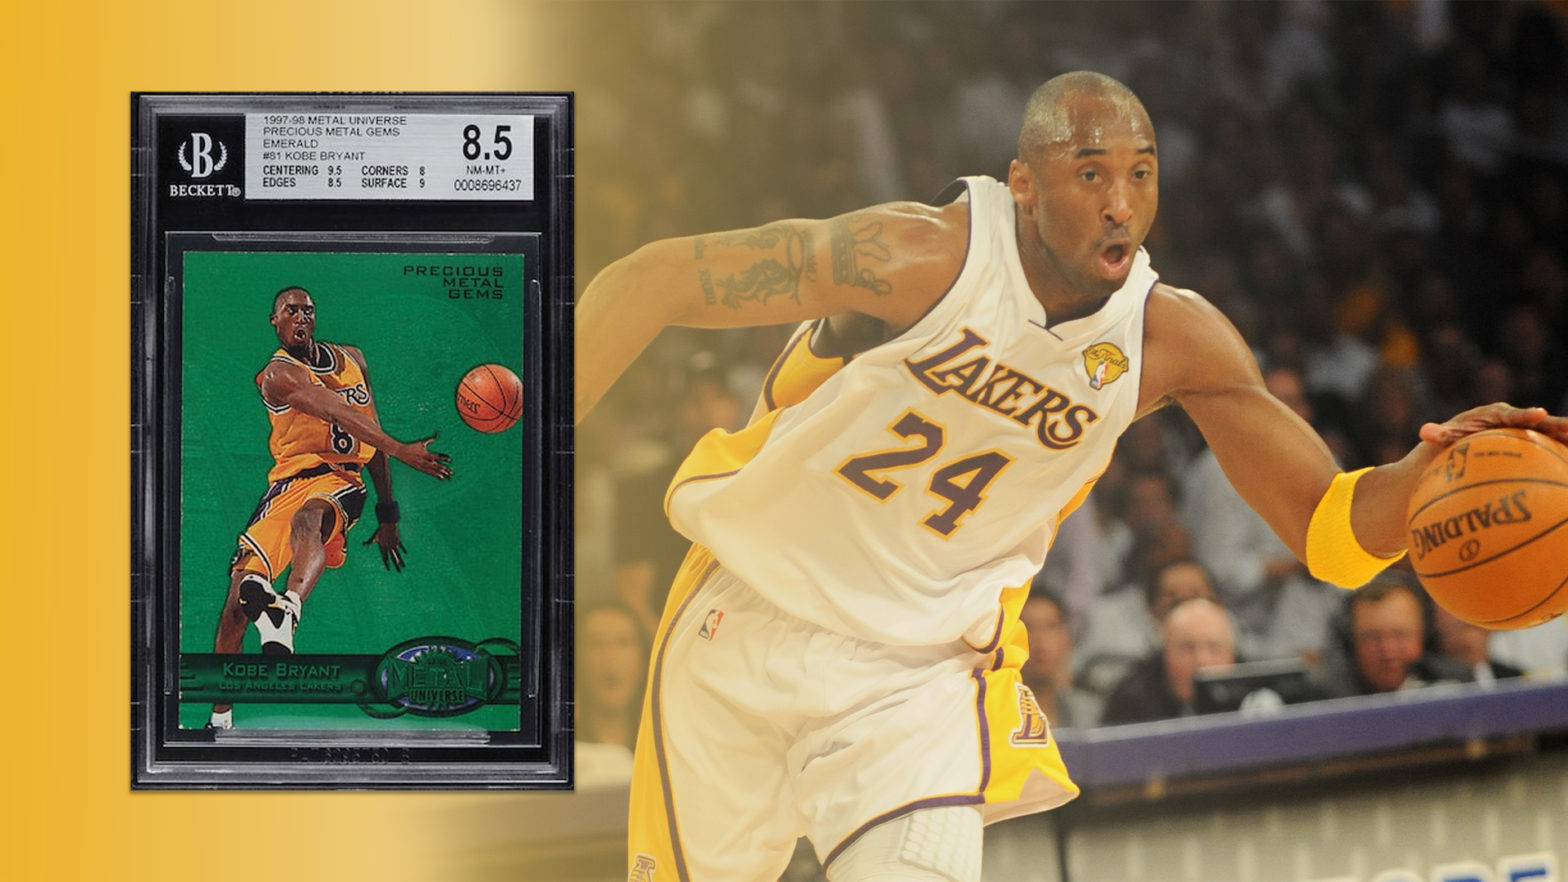 The 'Best Card In Existence' Featuring Kobe Bryant Gets Snagged For $2M